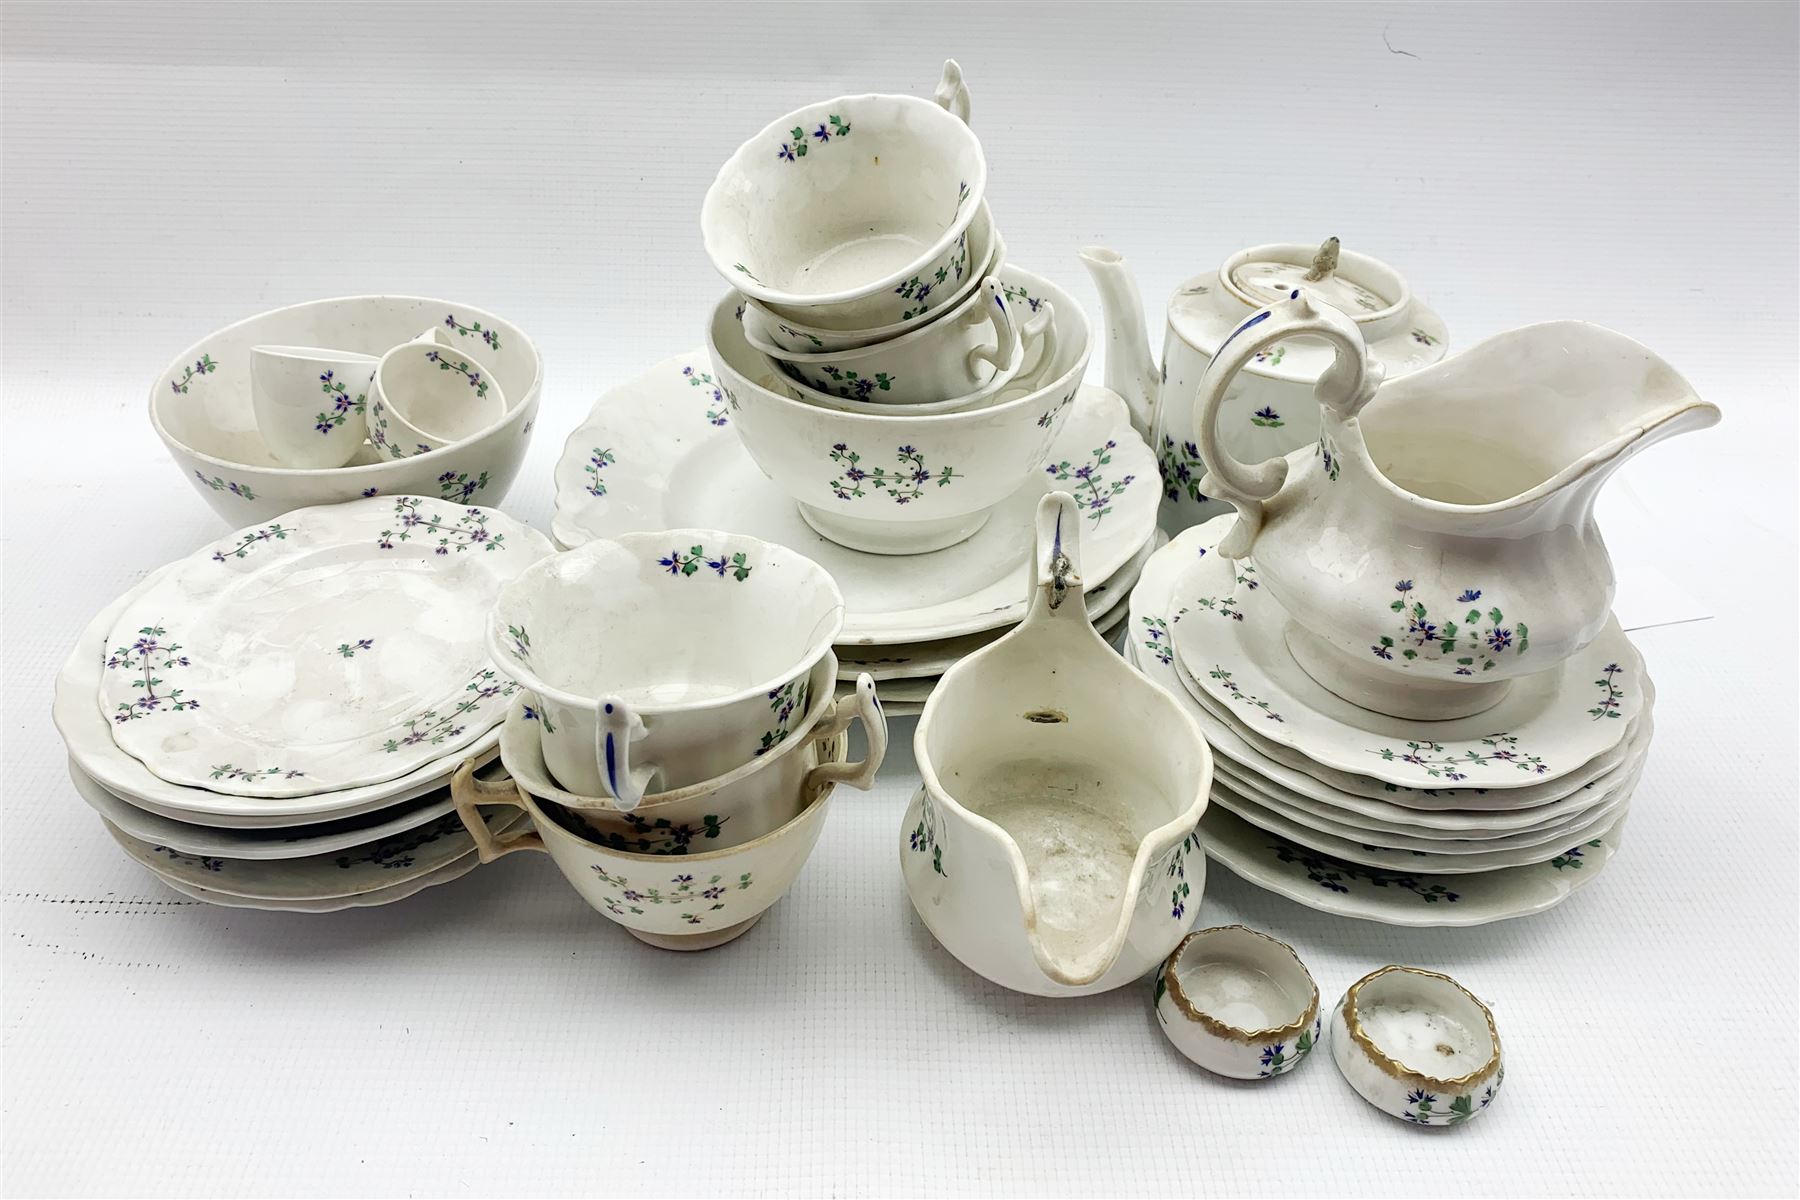 19th century French tea set decorated with floral sprigs 33 pieces